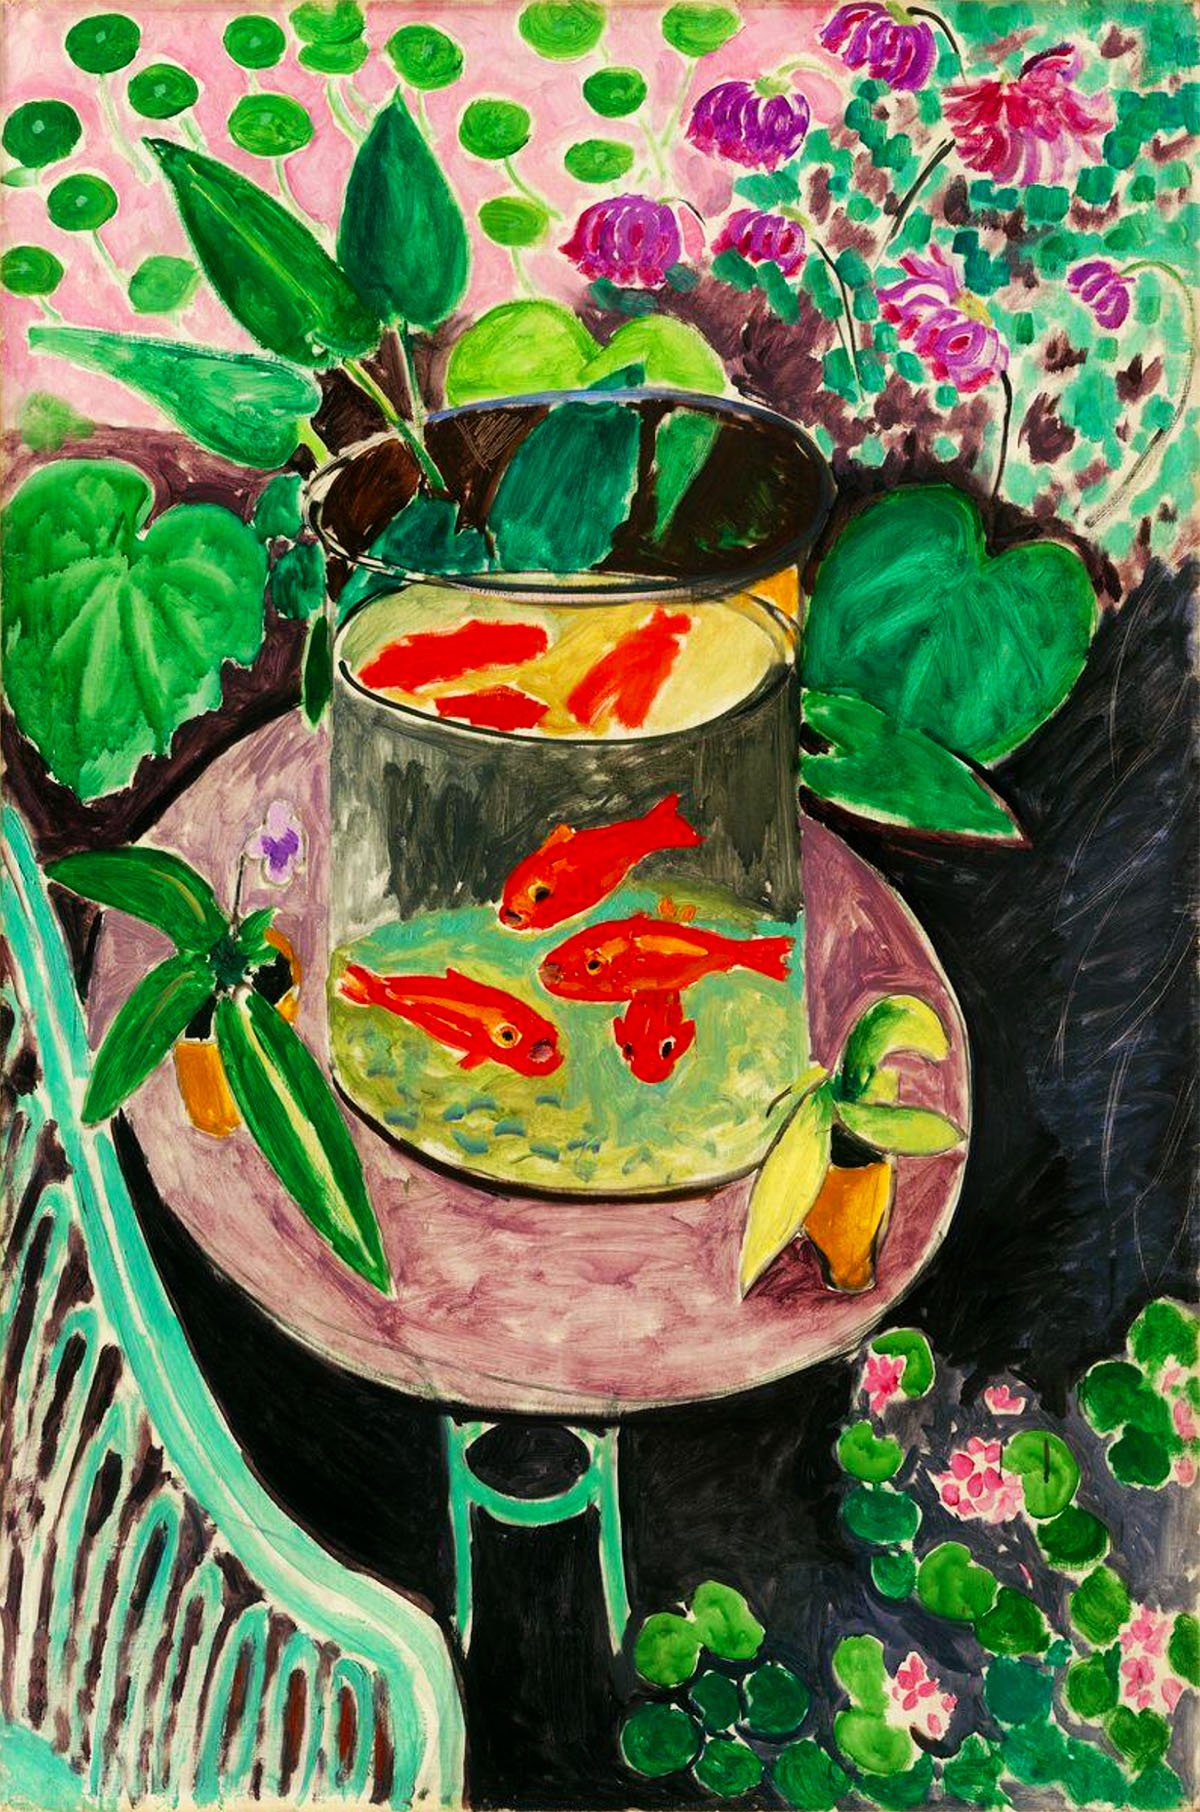 This image displays Henri Matisse's painting "Goldfish" from 1912. It portrays a vibrant scene focused on a glass bowl on a table, containing brightly colored orange goldfish swimming against a contrasting pale yellow background. Surrounding the bowl are lush green plants with broad leaves, and in the background, there is a decorative floral curtain with pink and purple accents. The entire composition is set against a backdrop of a dark floor, with the bold use of complementary colors creating a lively and dynamic still life.